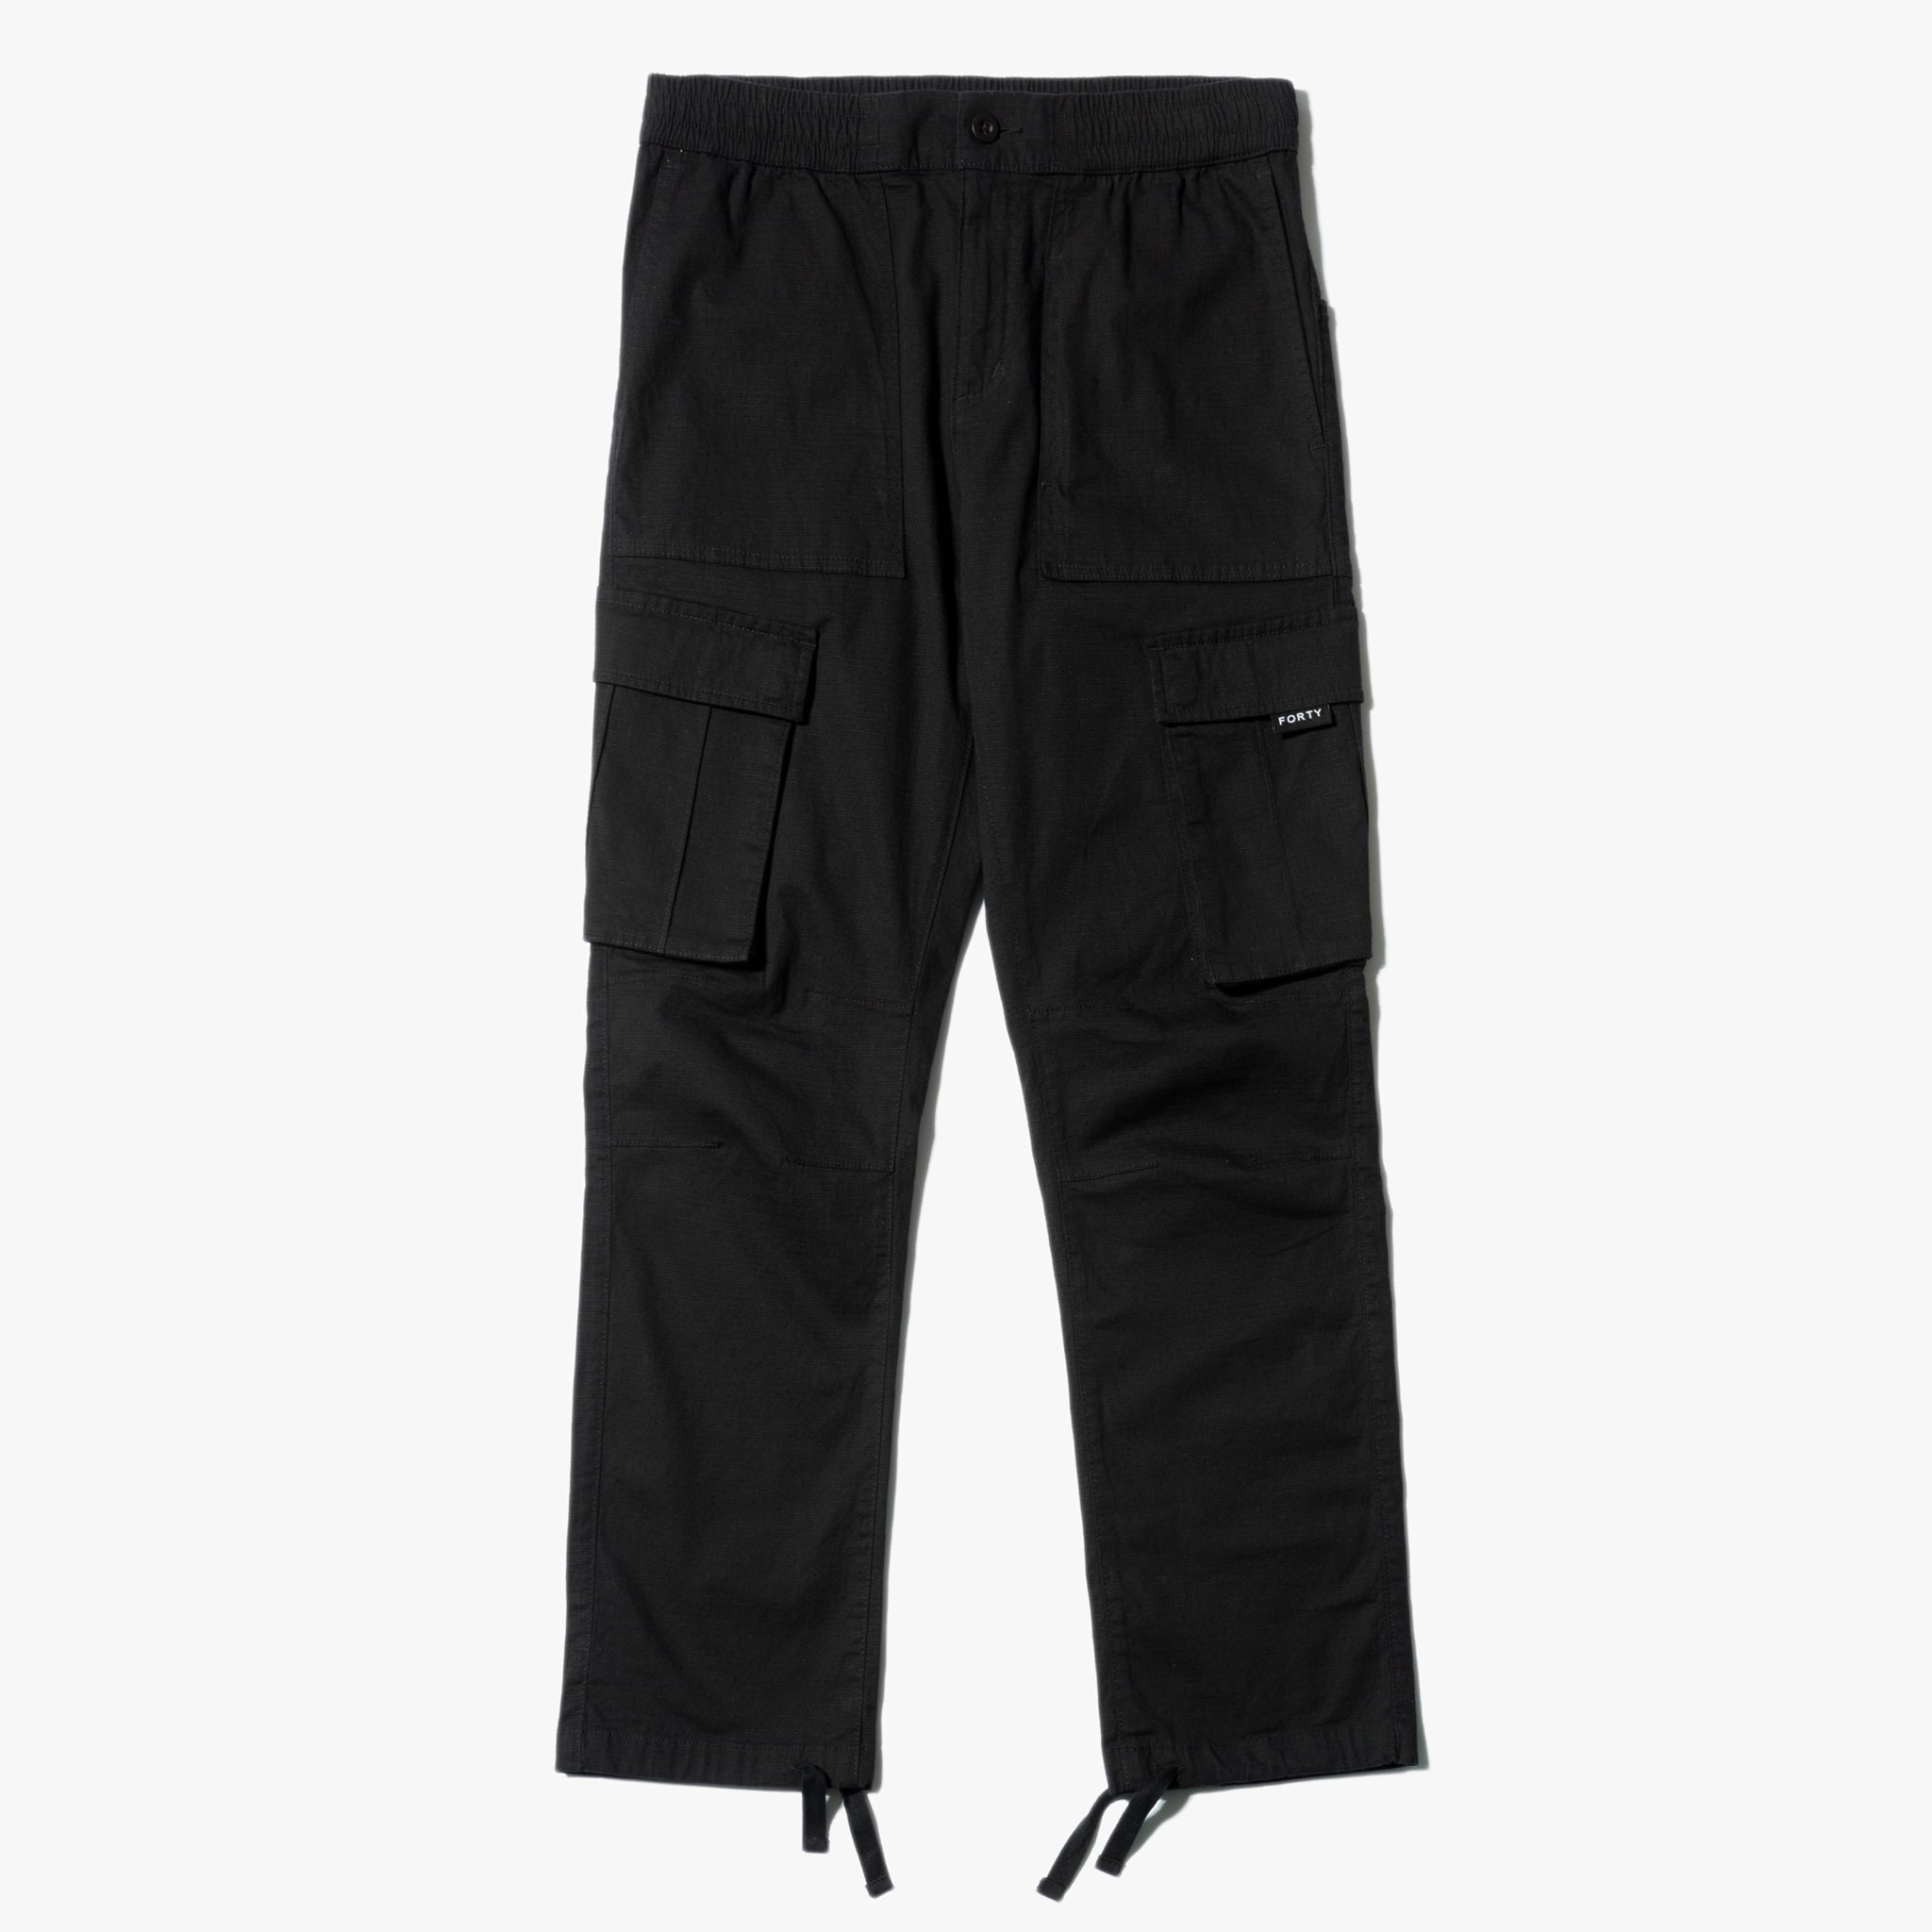 Rip Twill Ripstop Cargo Pants (Black) – Forty Clothing